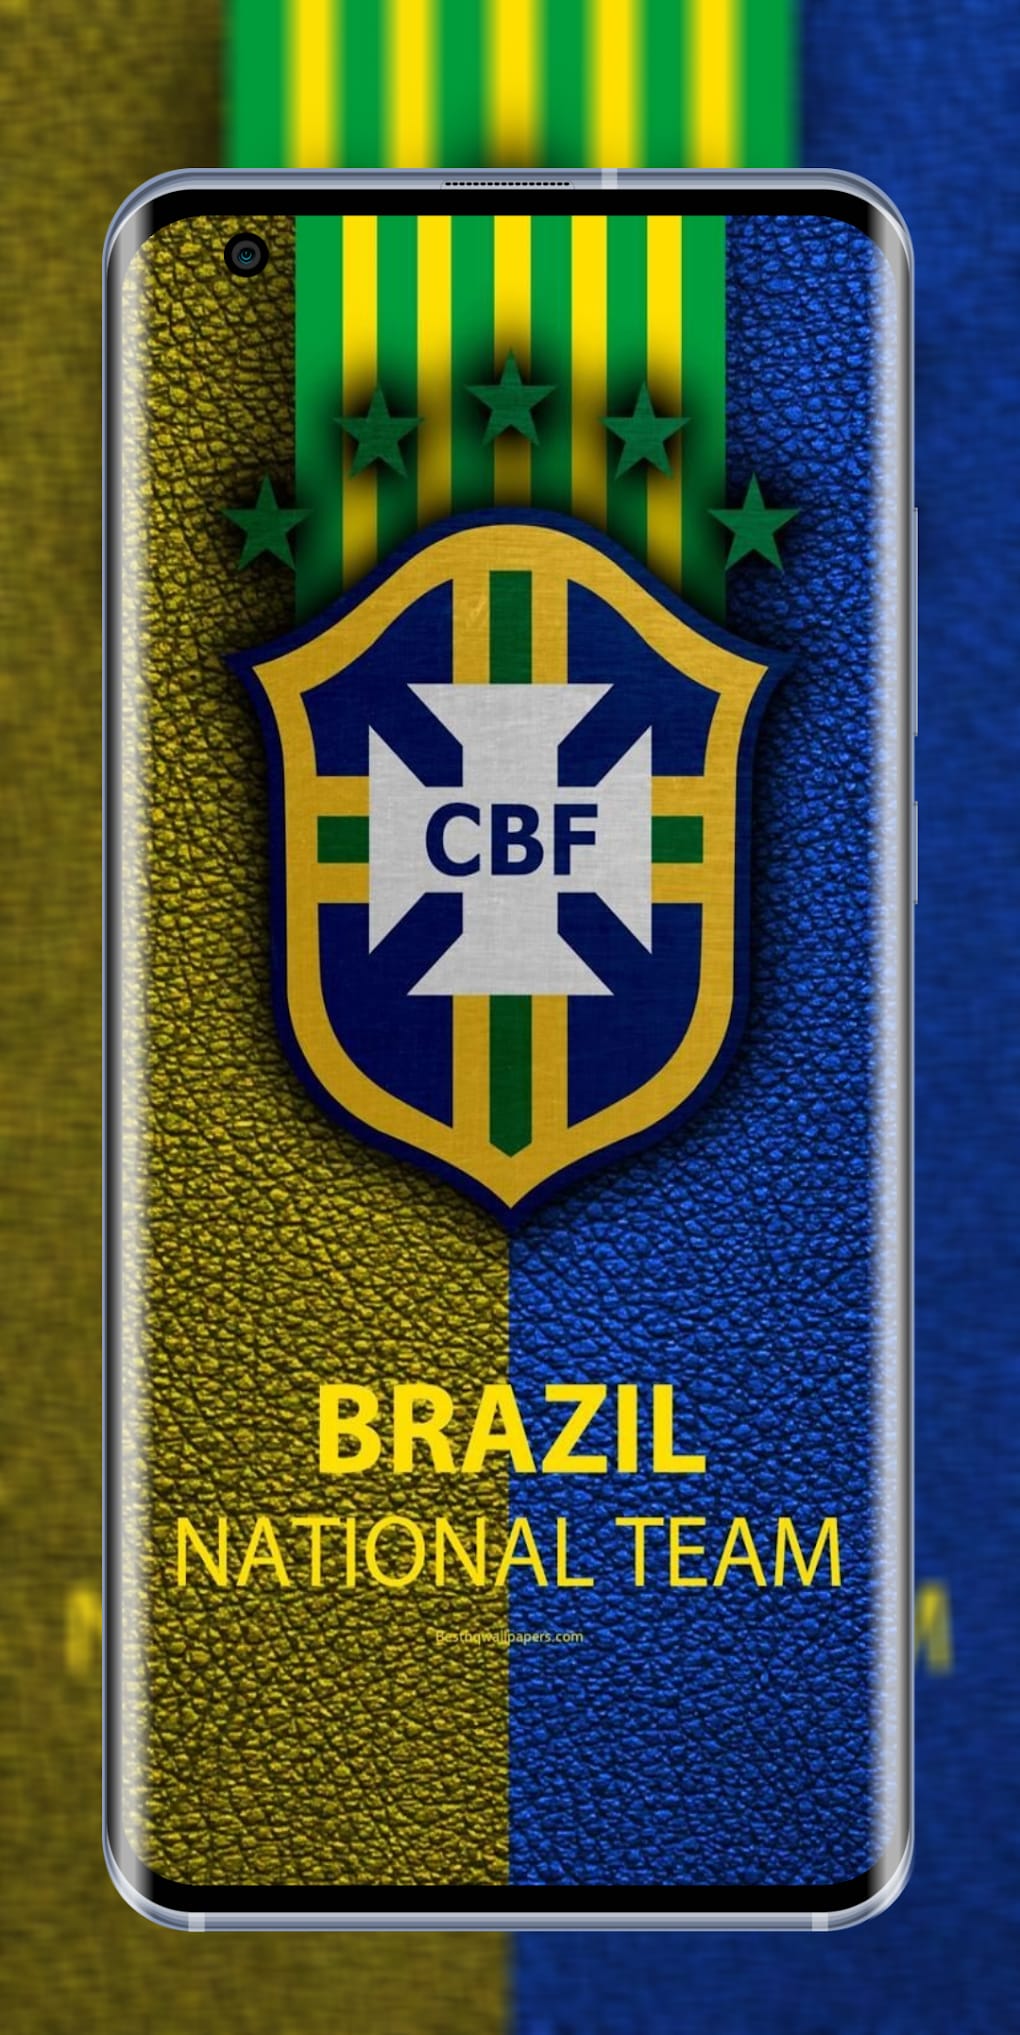 View of the Logo of Brasil Against Argentina National Football Team Crest  Editorial Image - Image of europe, brazil: 261703740